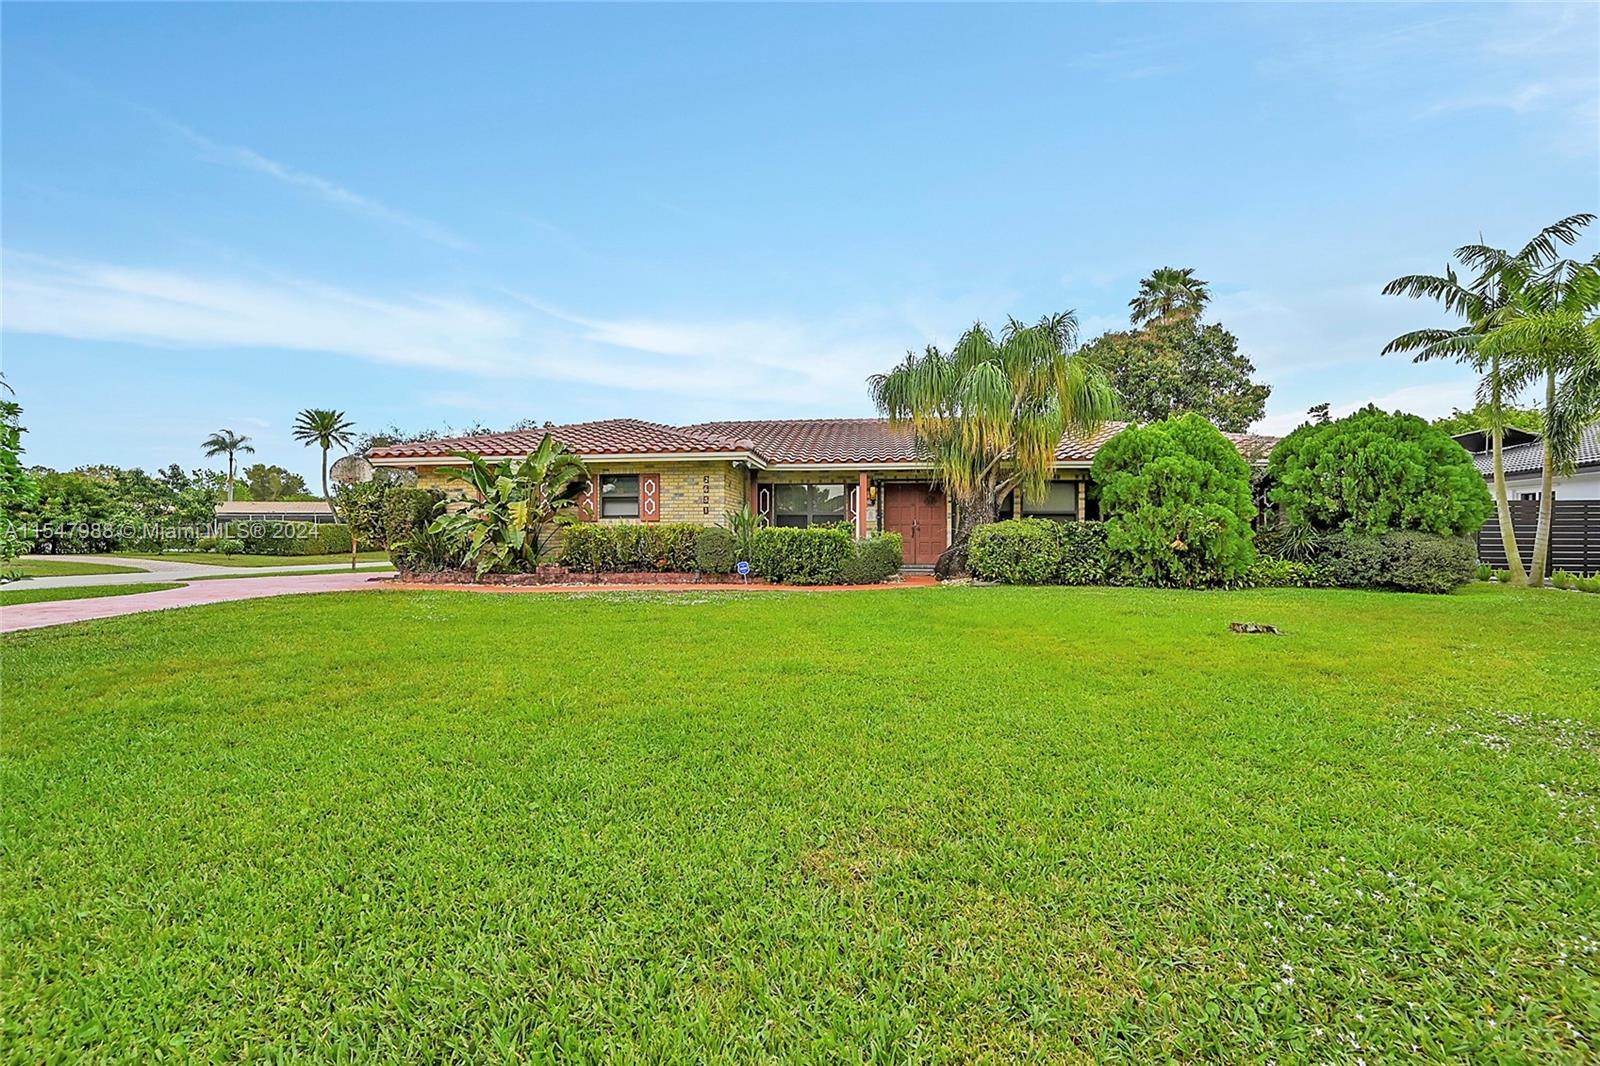 2651 Nw 84th Ave, Coral Springs, Broward County, Florida - 4 Bedrooms  
3 Bathrooms - 